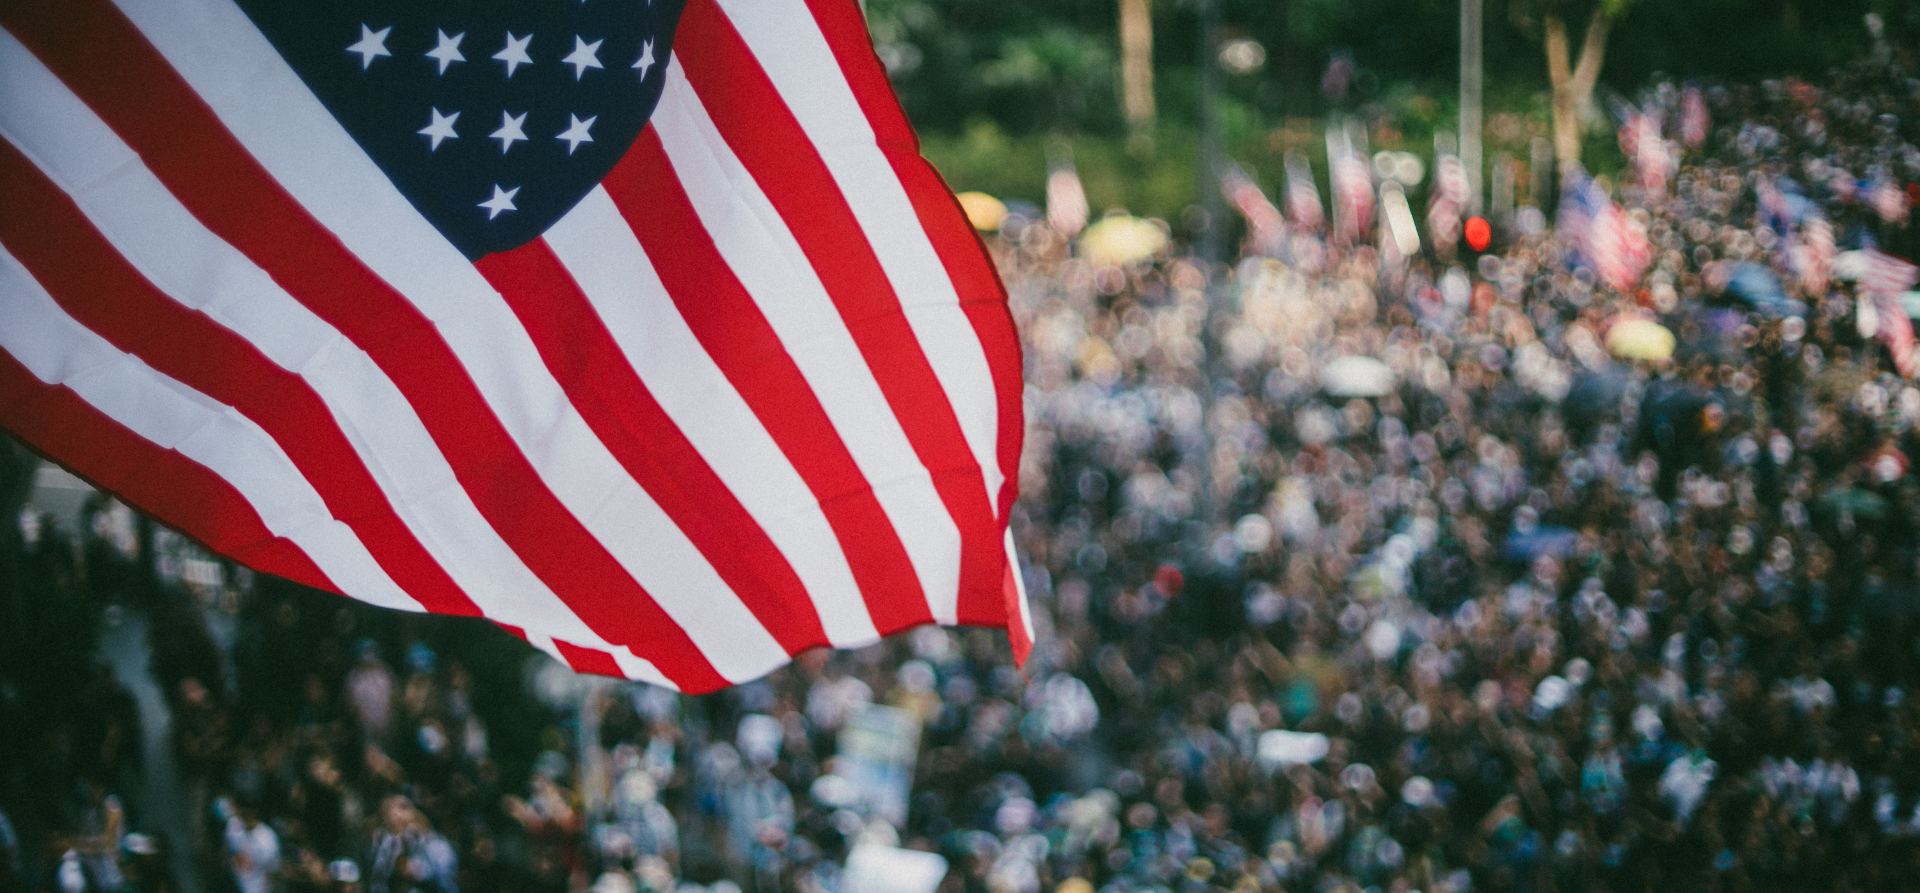 Aerial photo of US flag above out-of-focus crowd.